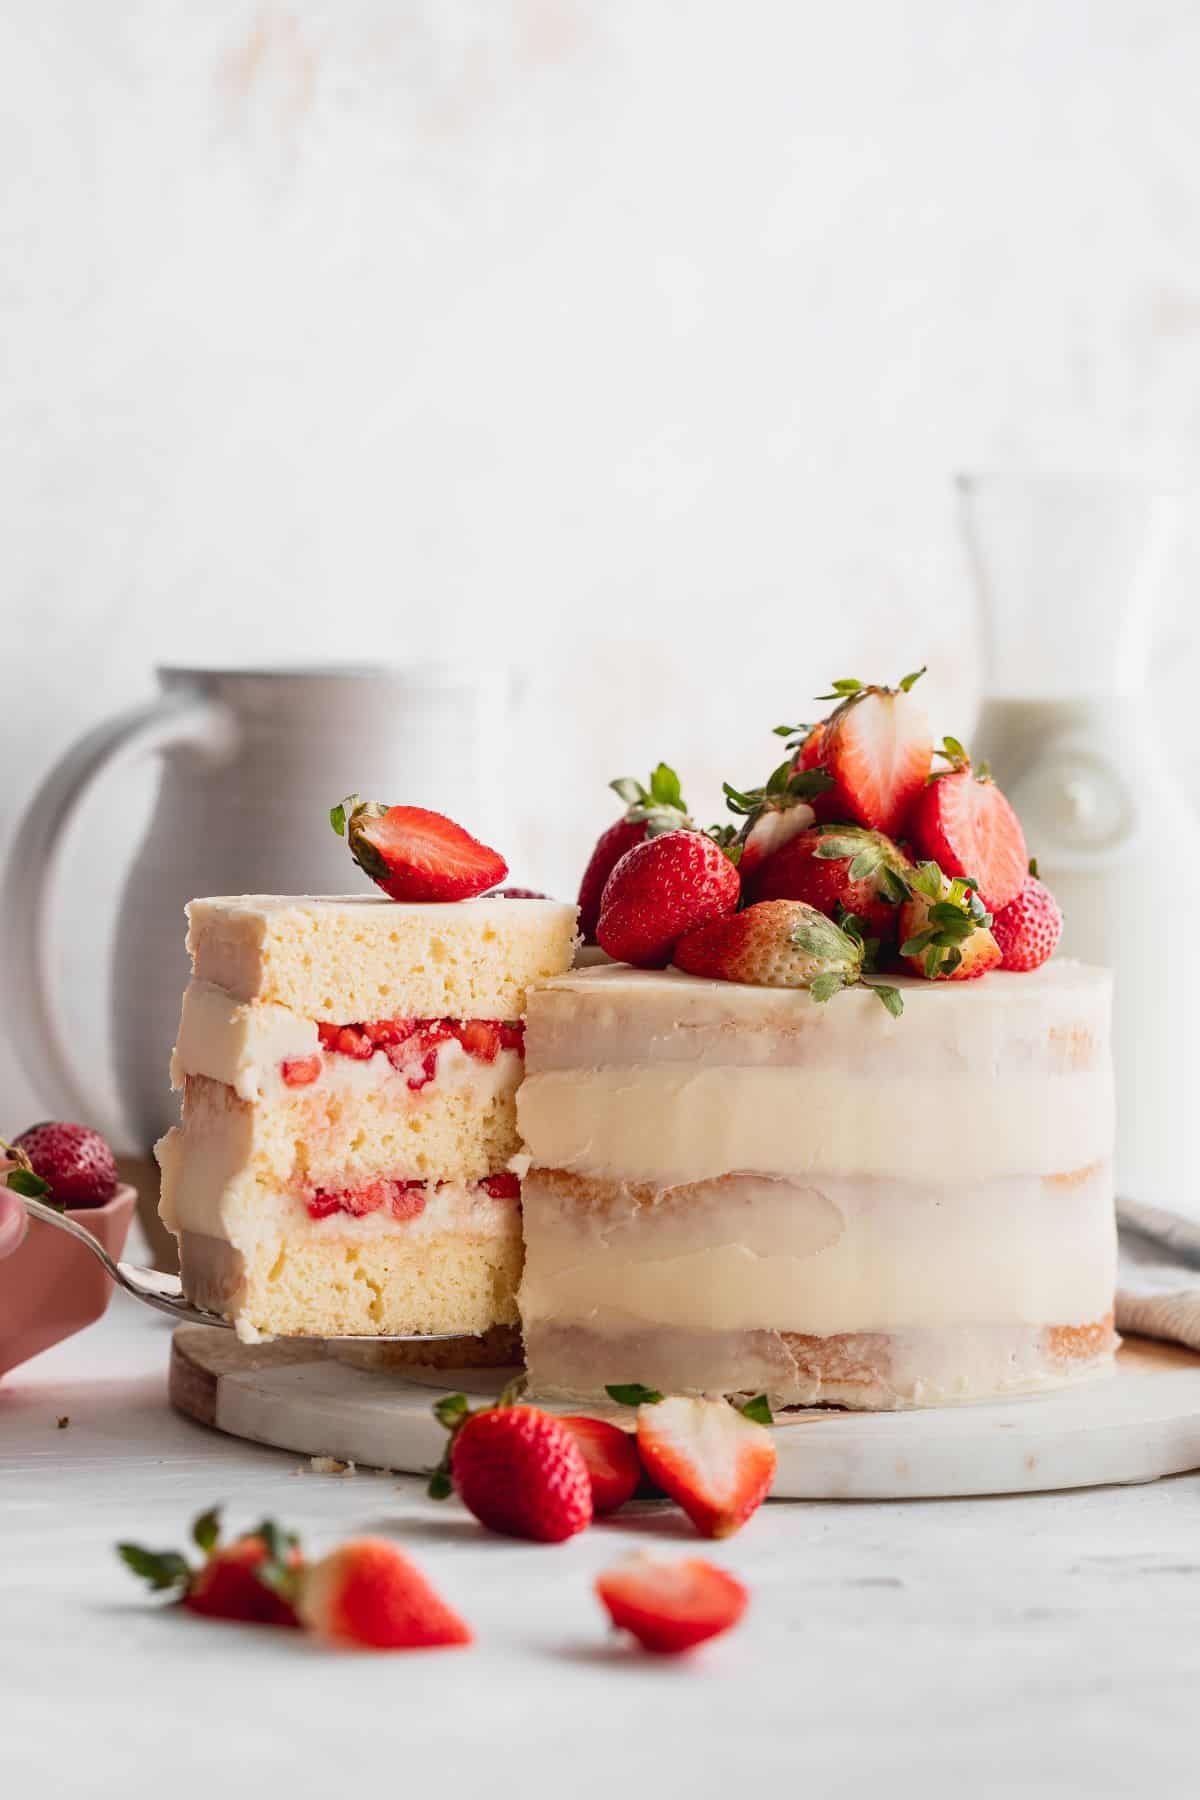 Taking a cake slice out of the strawberry semi-naked cake.